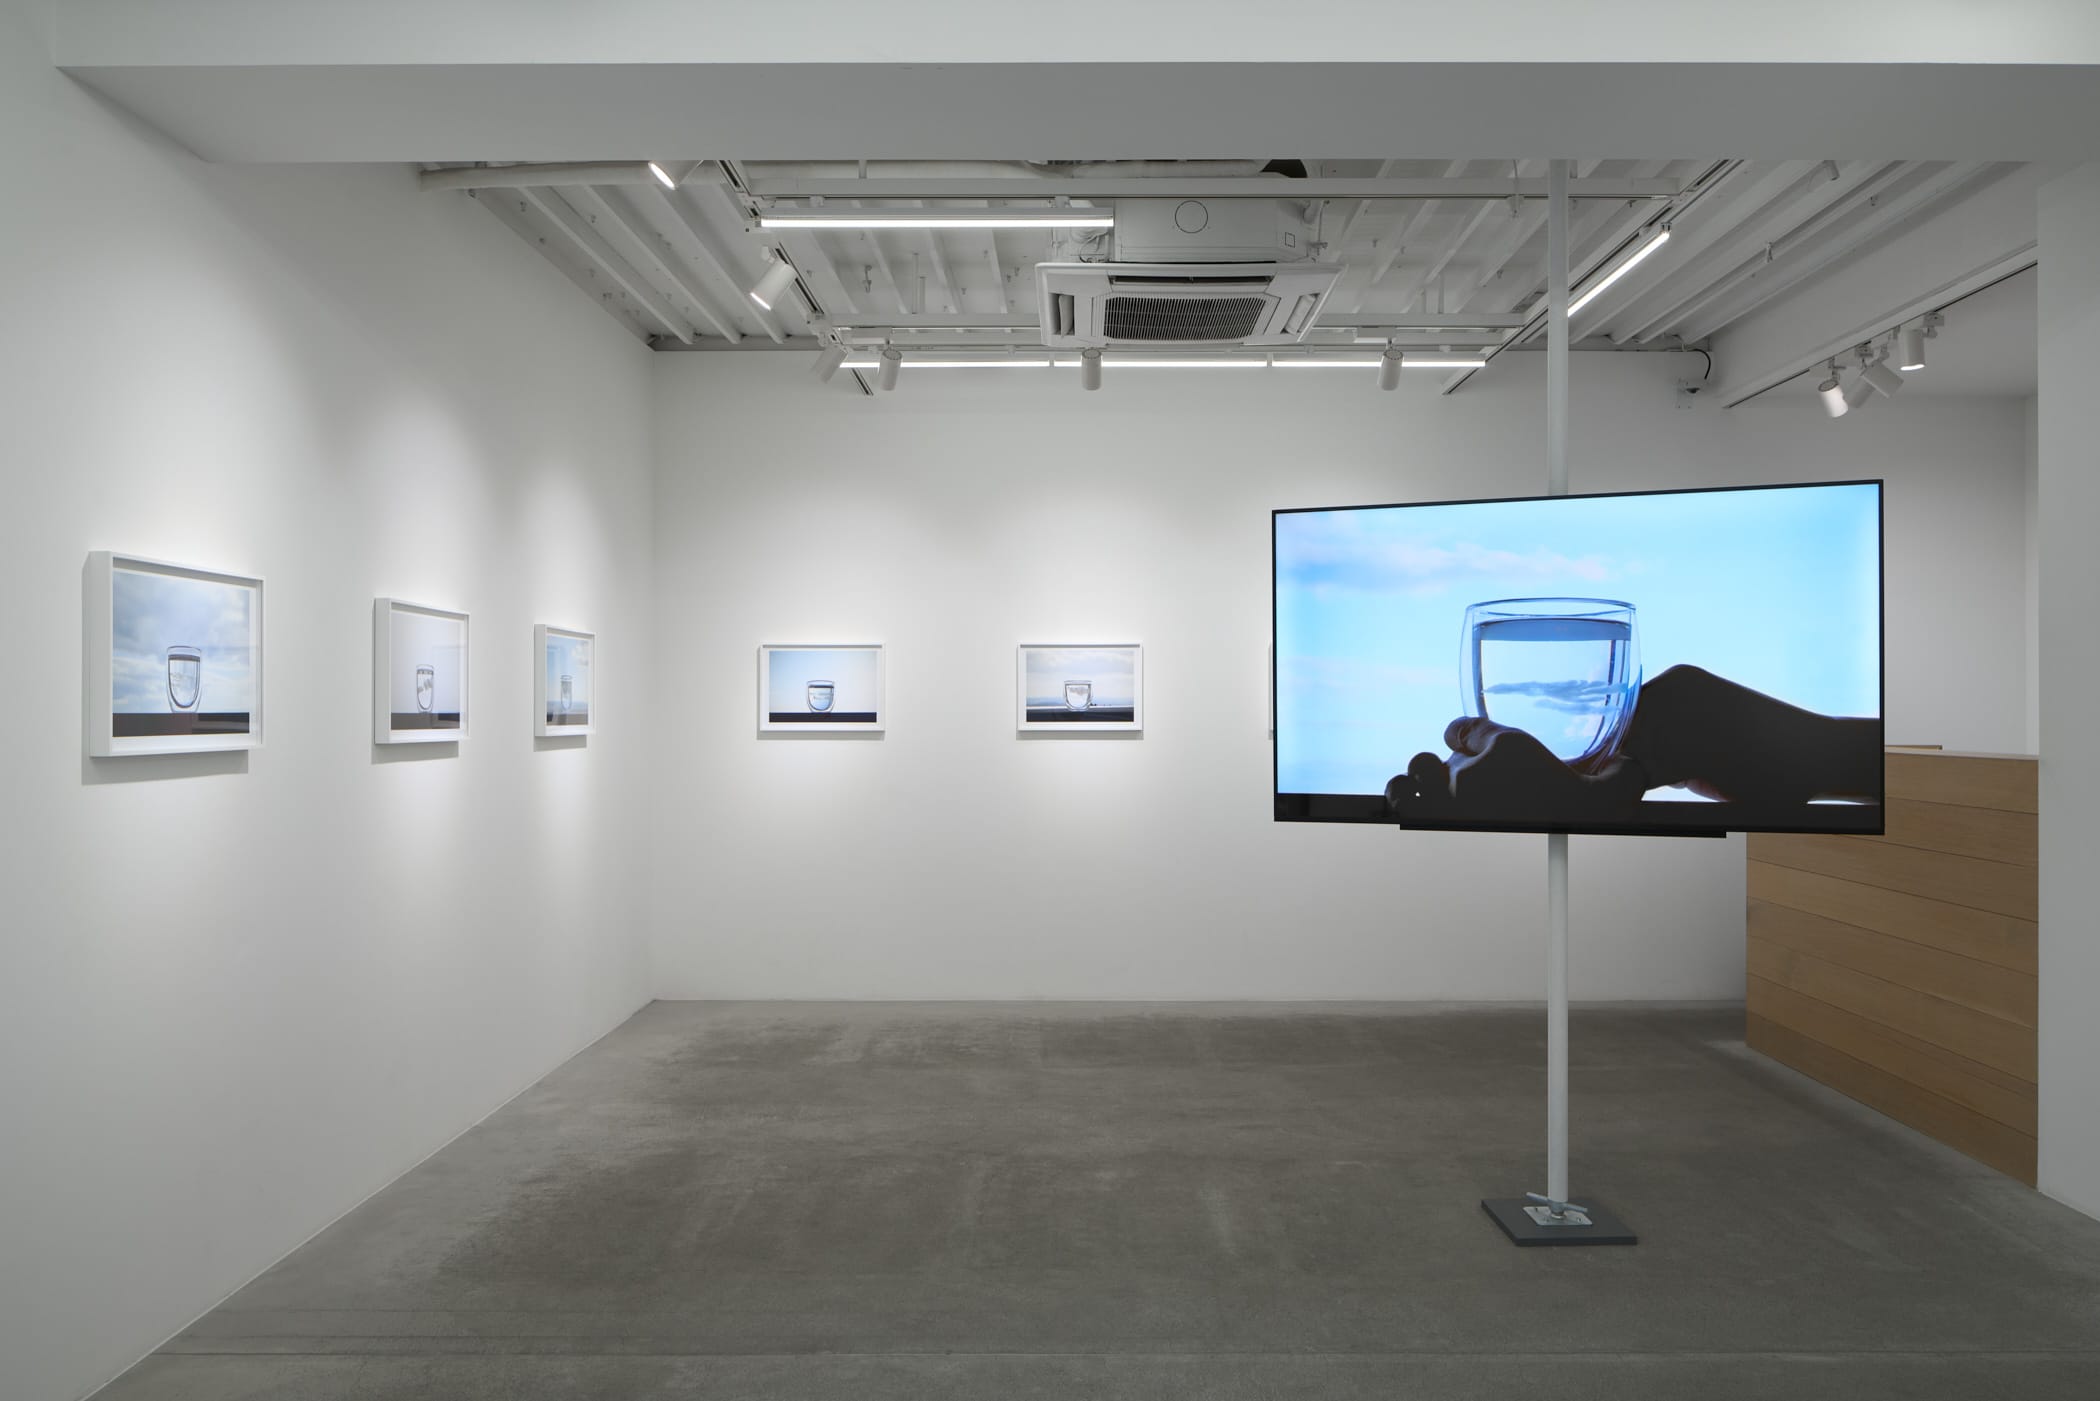 Installation view of Solo Exhibition “Thinking of Yesterday’s Sky”